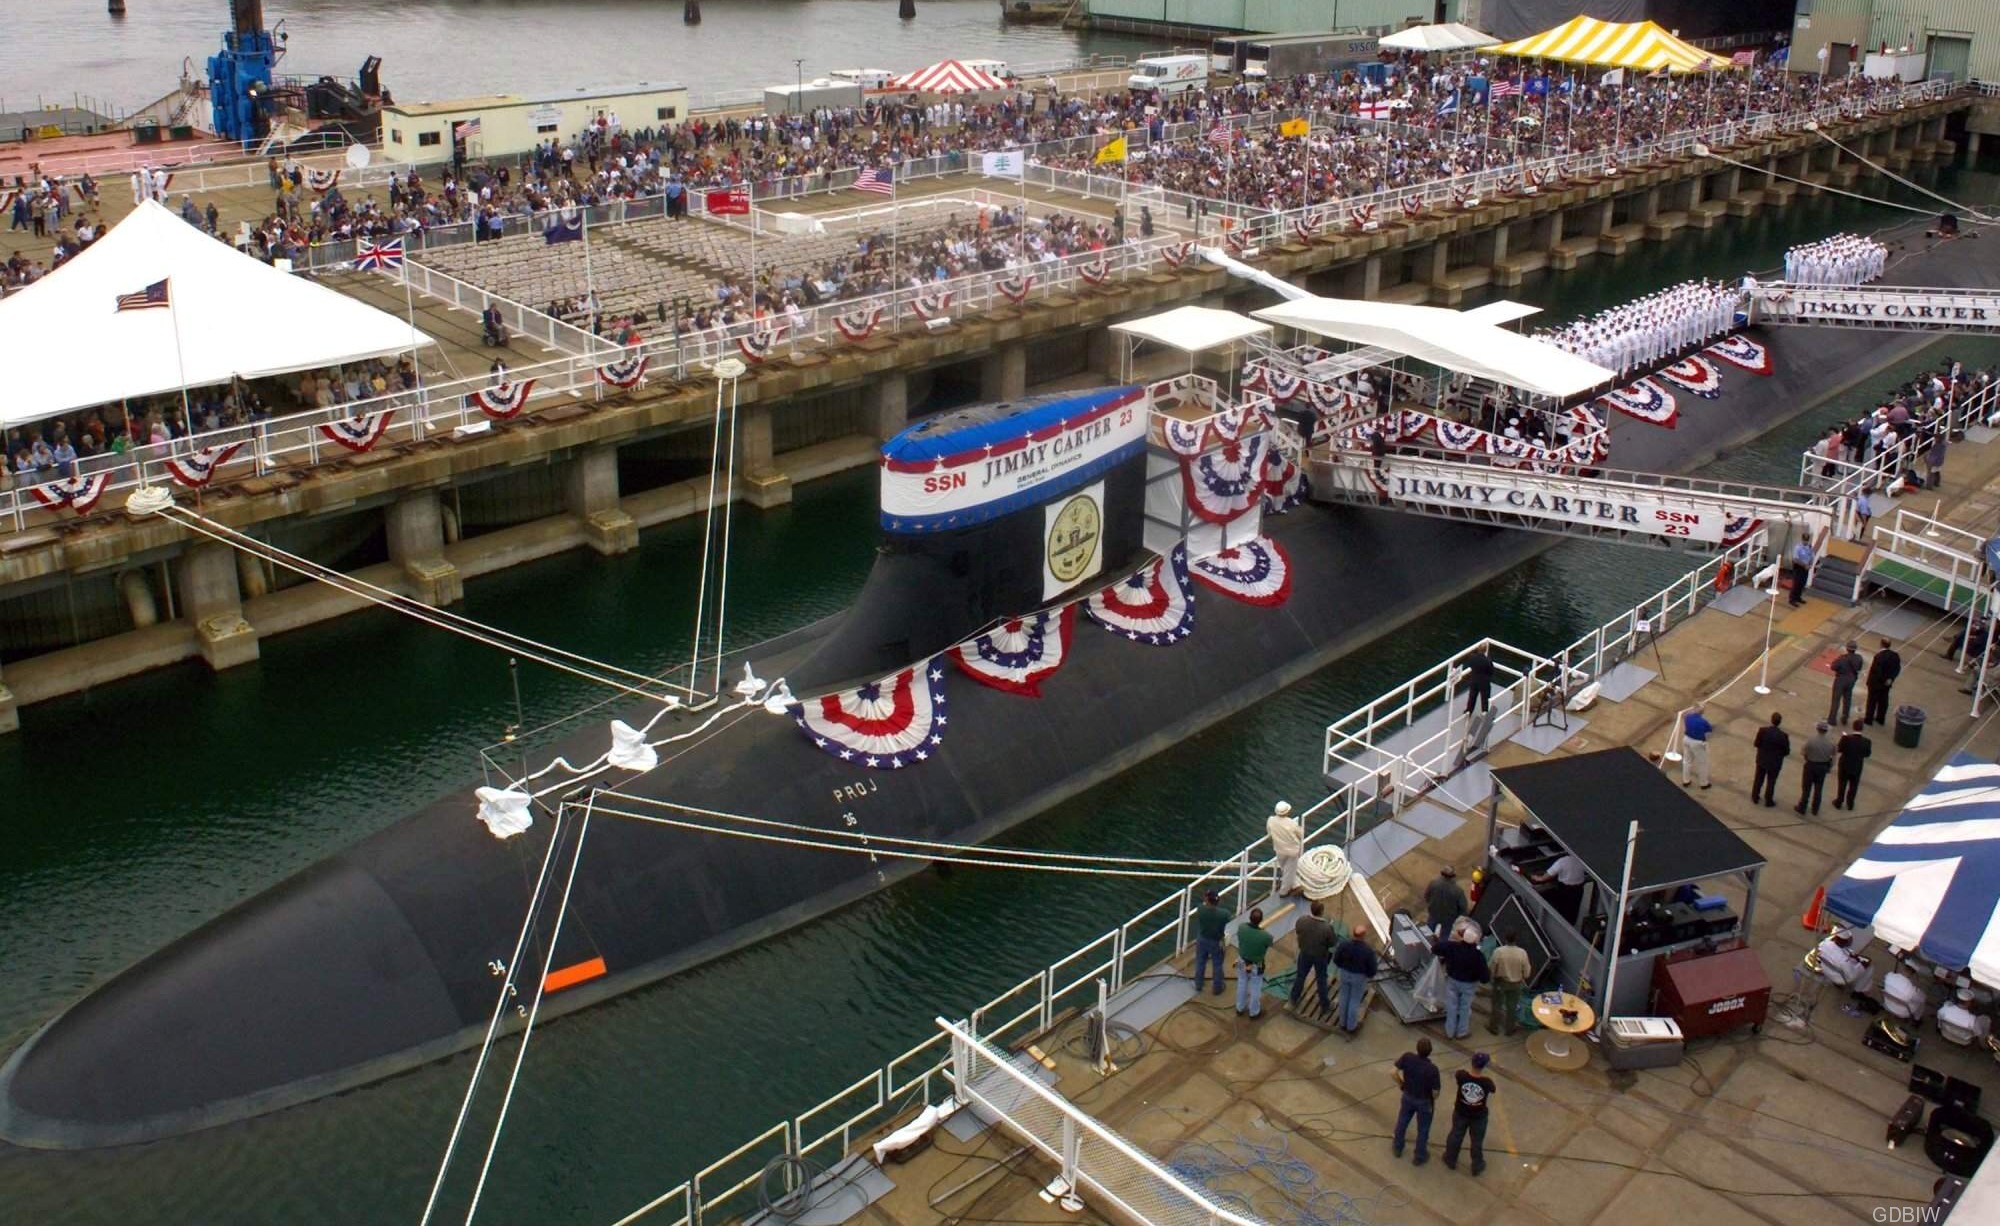 ssn-23 uss jimmy carter seawolf class attack submarine us navy christening general dynamics electric boat groton 10